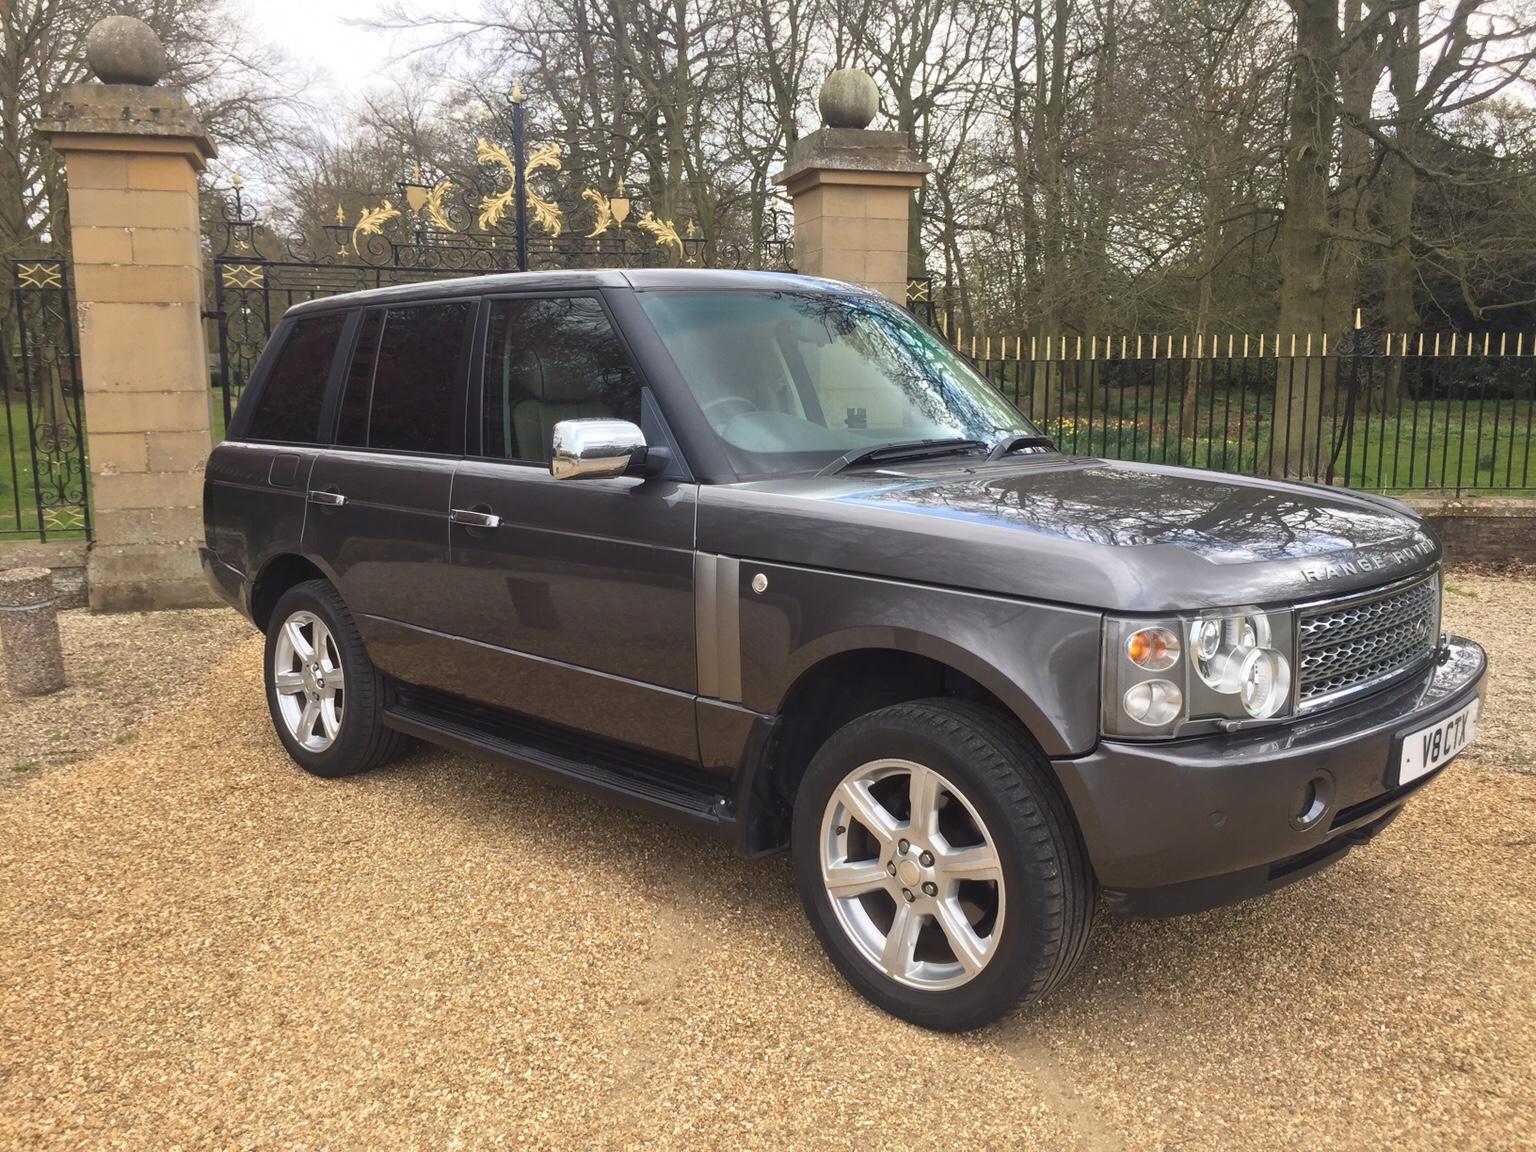 Range Rover L322 4.4 Vogue LPG in Scunthorpe for £4,250.00